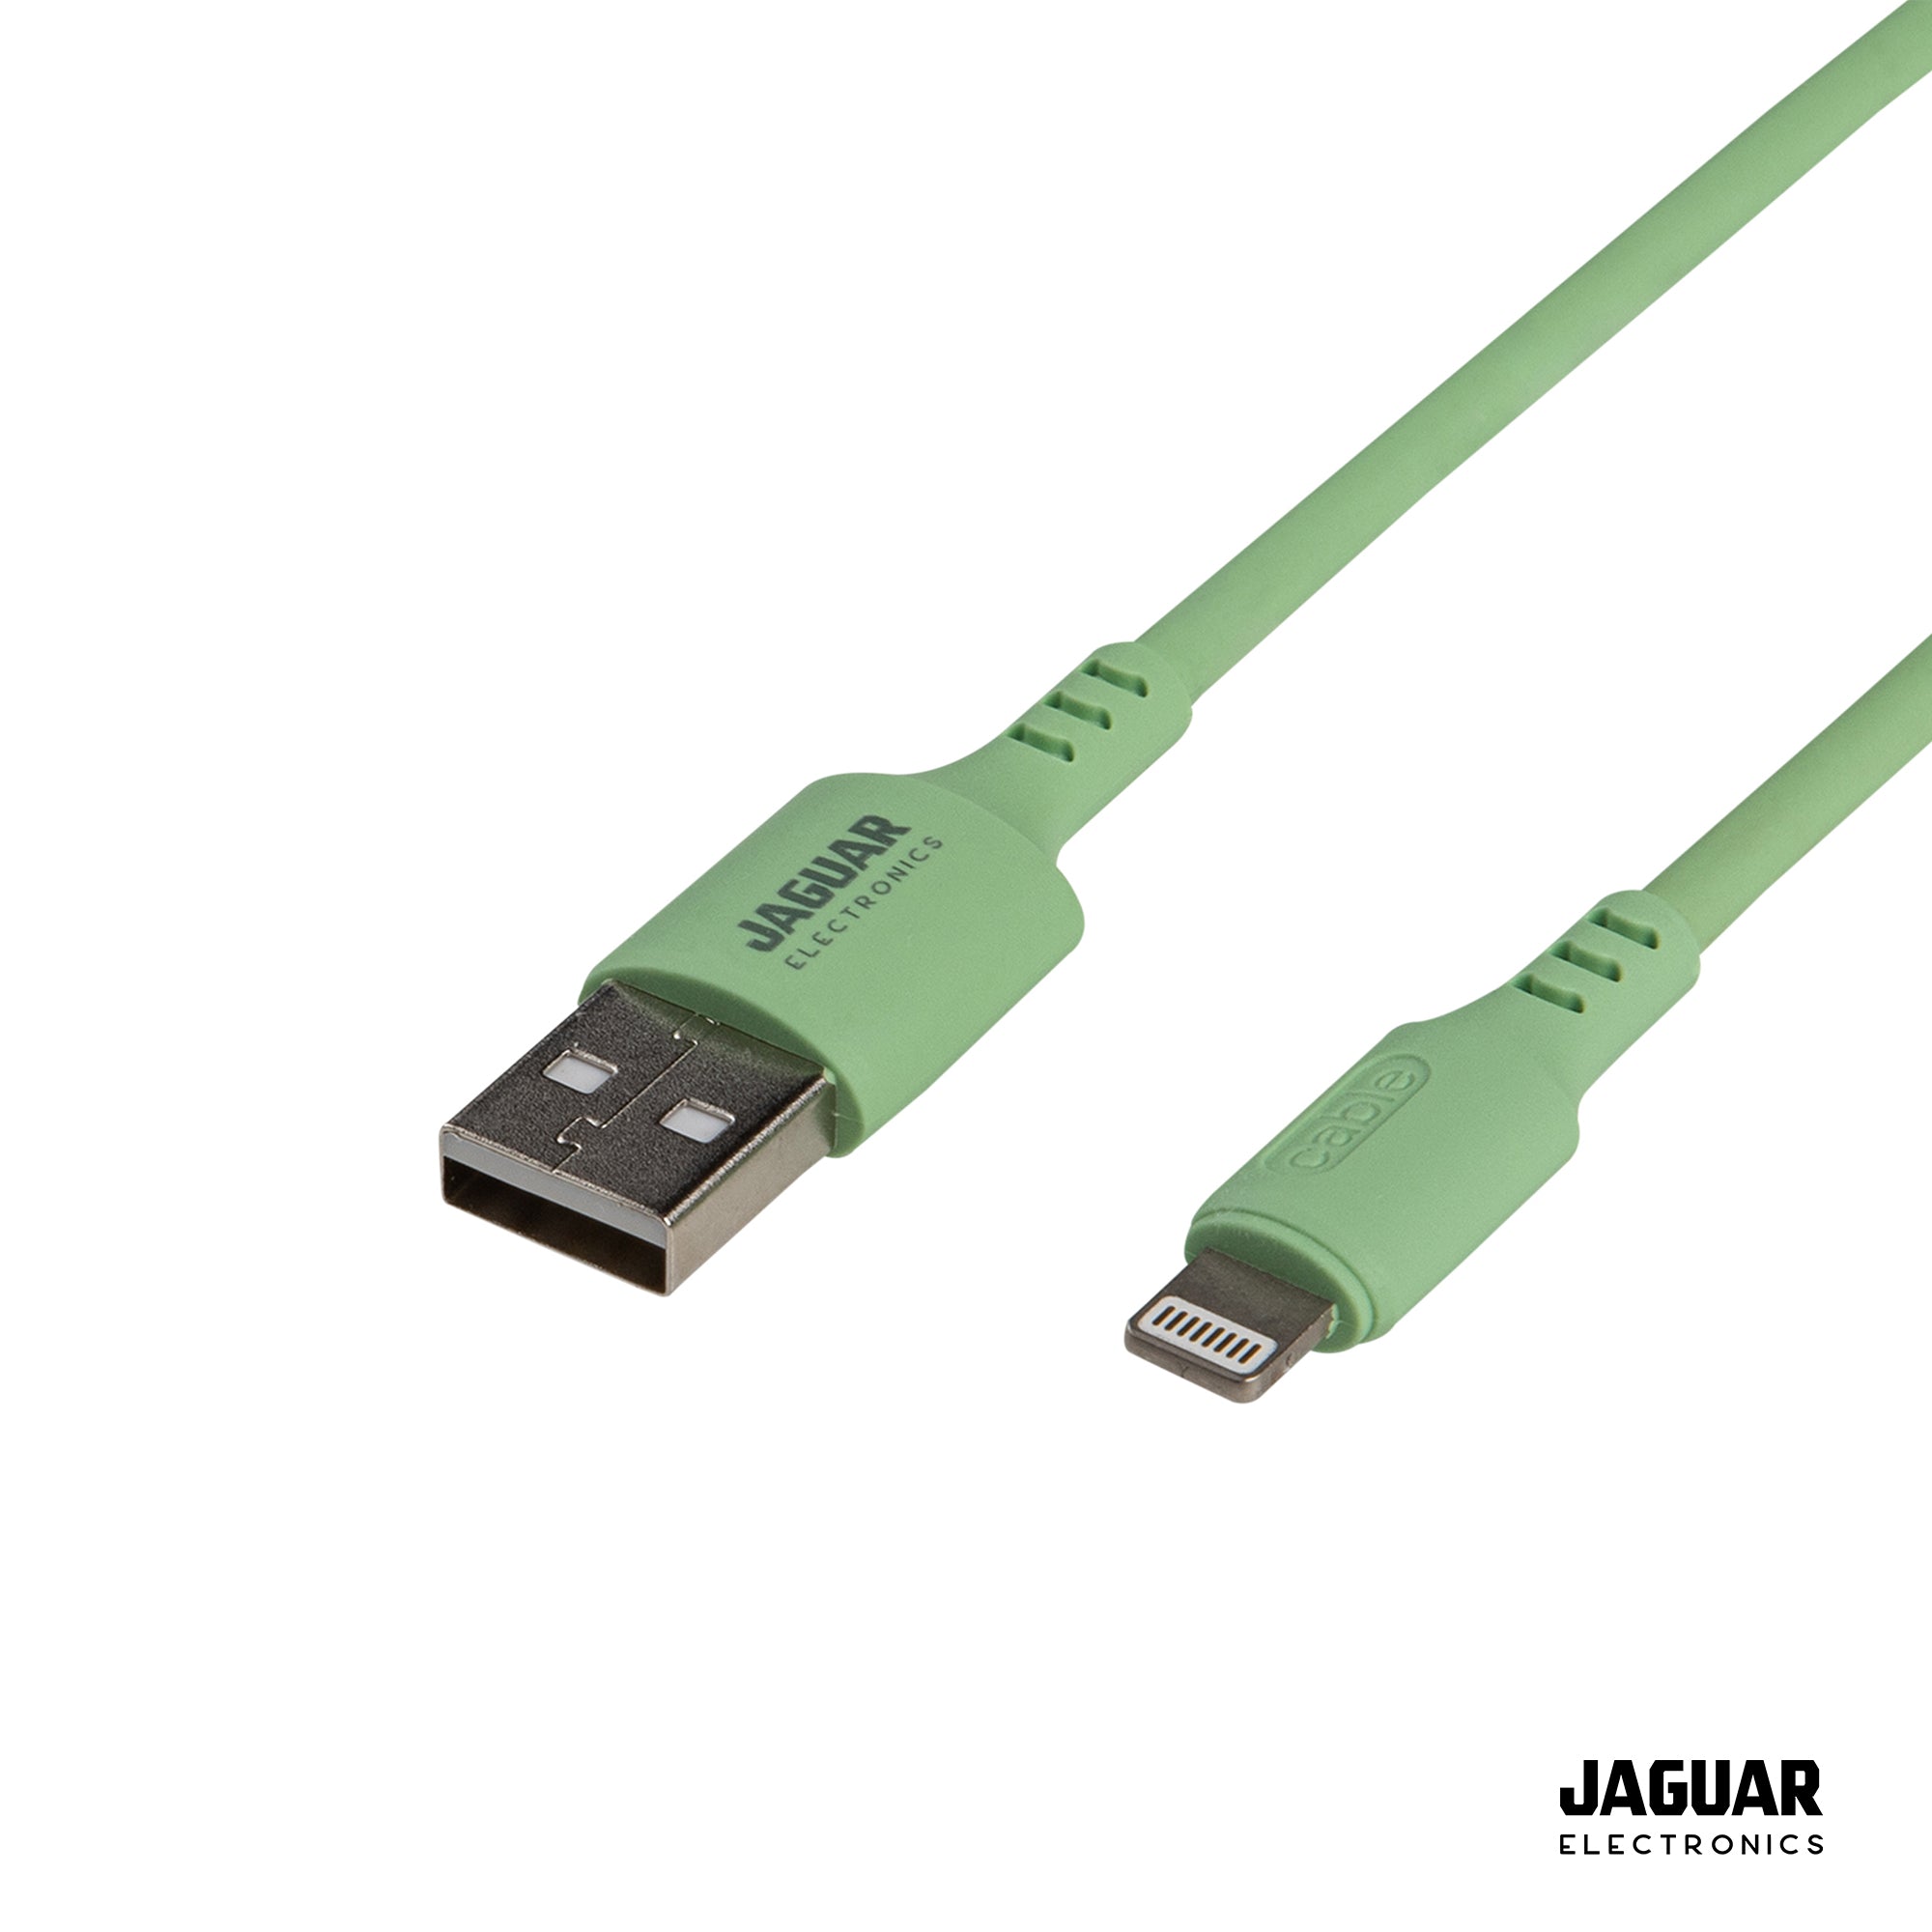 Jaguar Electronics CG27 2.4A 1 Meter Fast Charging Data Ultra Silicone Cable Lightning